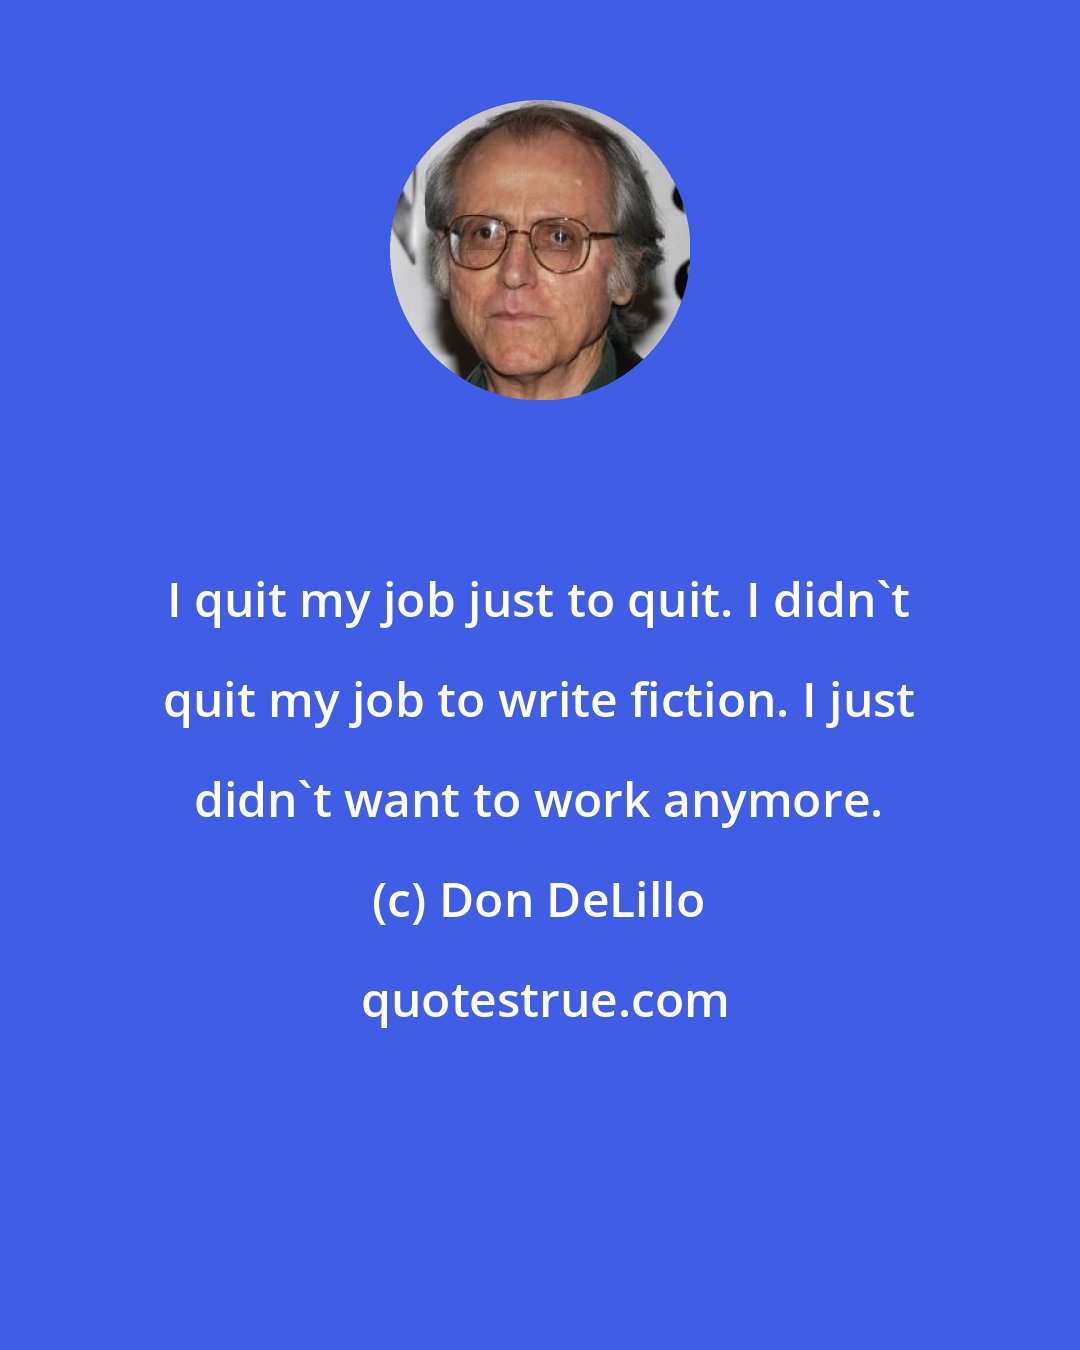 Don DeLillo: I quit my job just to quit. I didn't quit my job to write fiction. I just didn't want to work anymore.